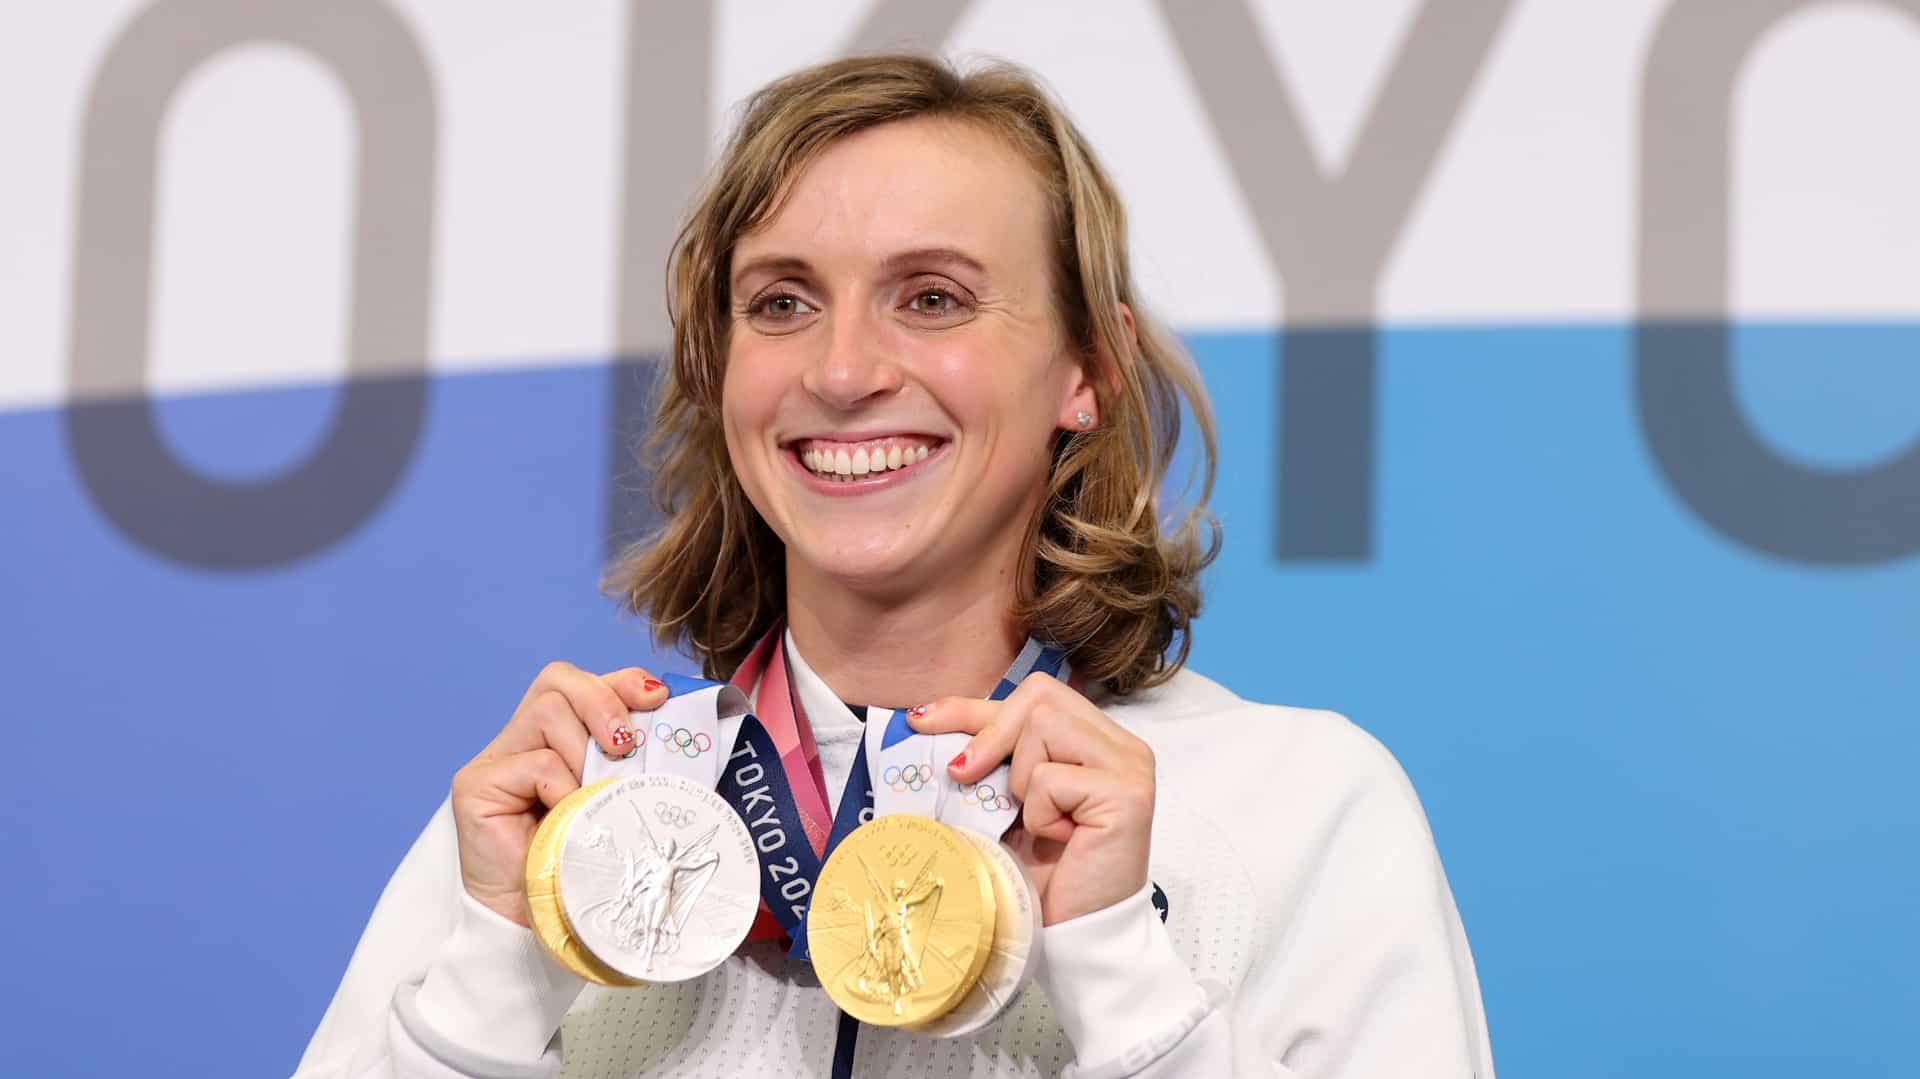 Podcast Grabbing A Bite To Eat With Katie Ledecky Nbc Olympics